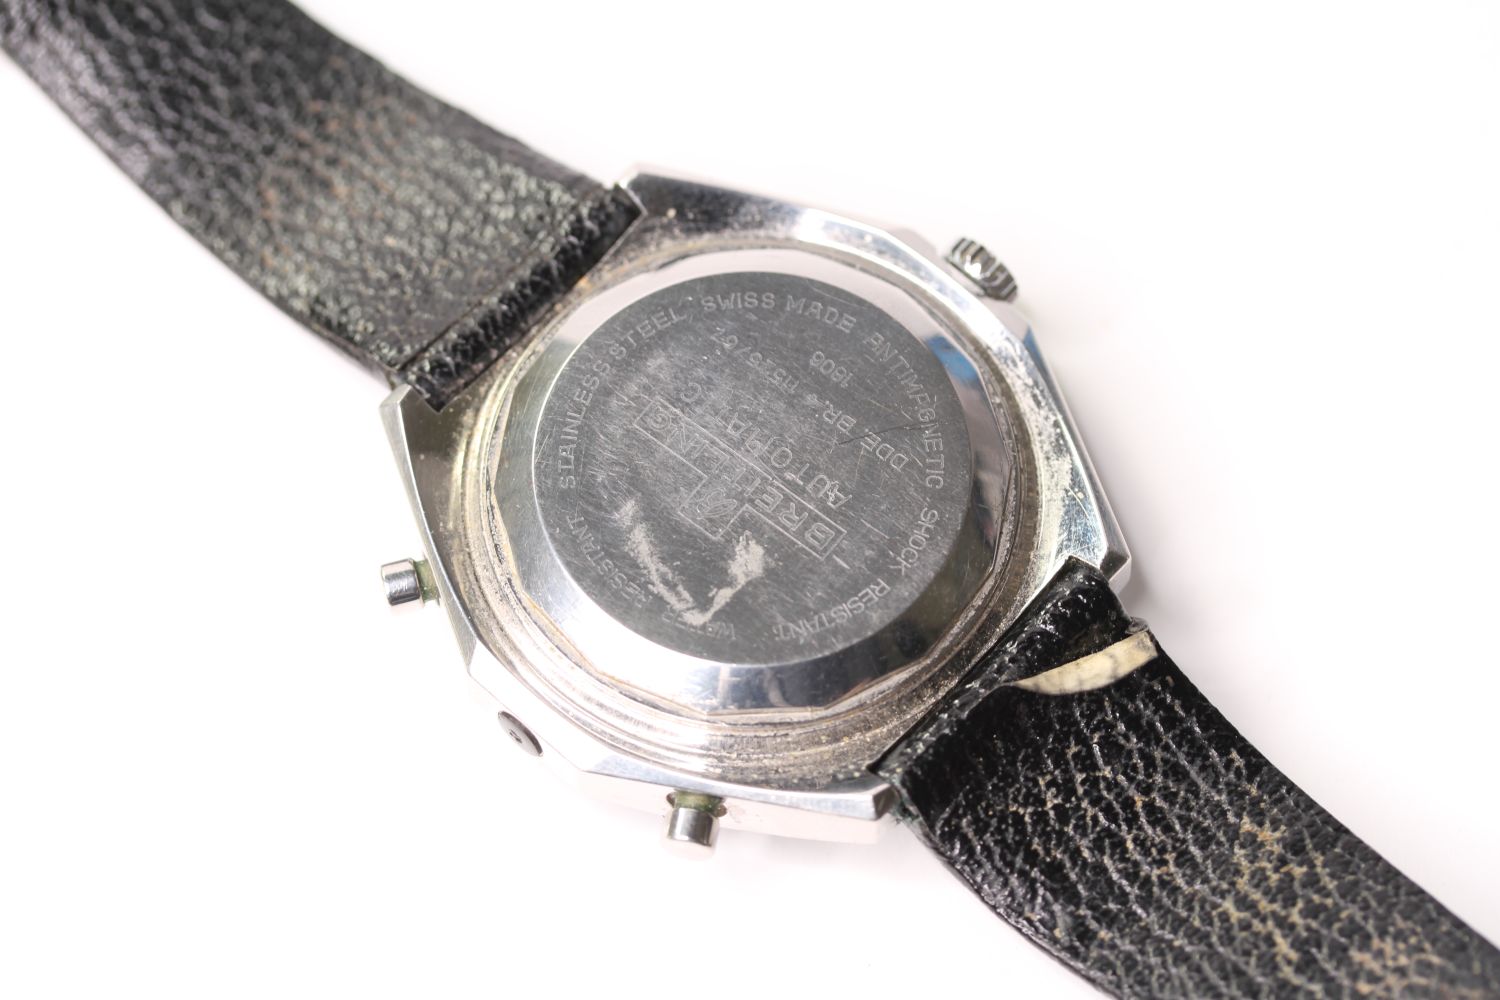 GENTS BREITLING NAVITIMER DDE BR 1152-67, circular black and white dial with illuminated hands, - Image 2 of 4